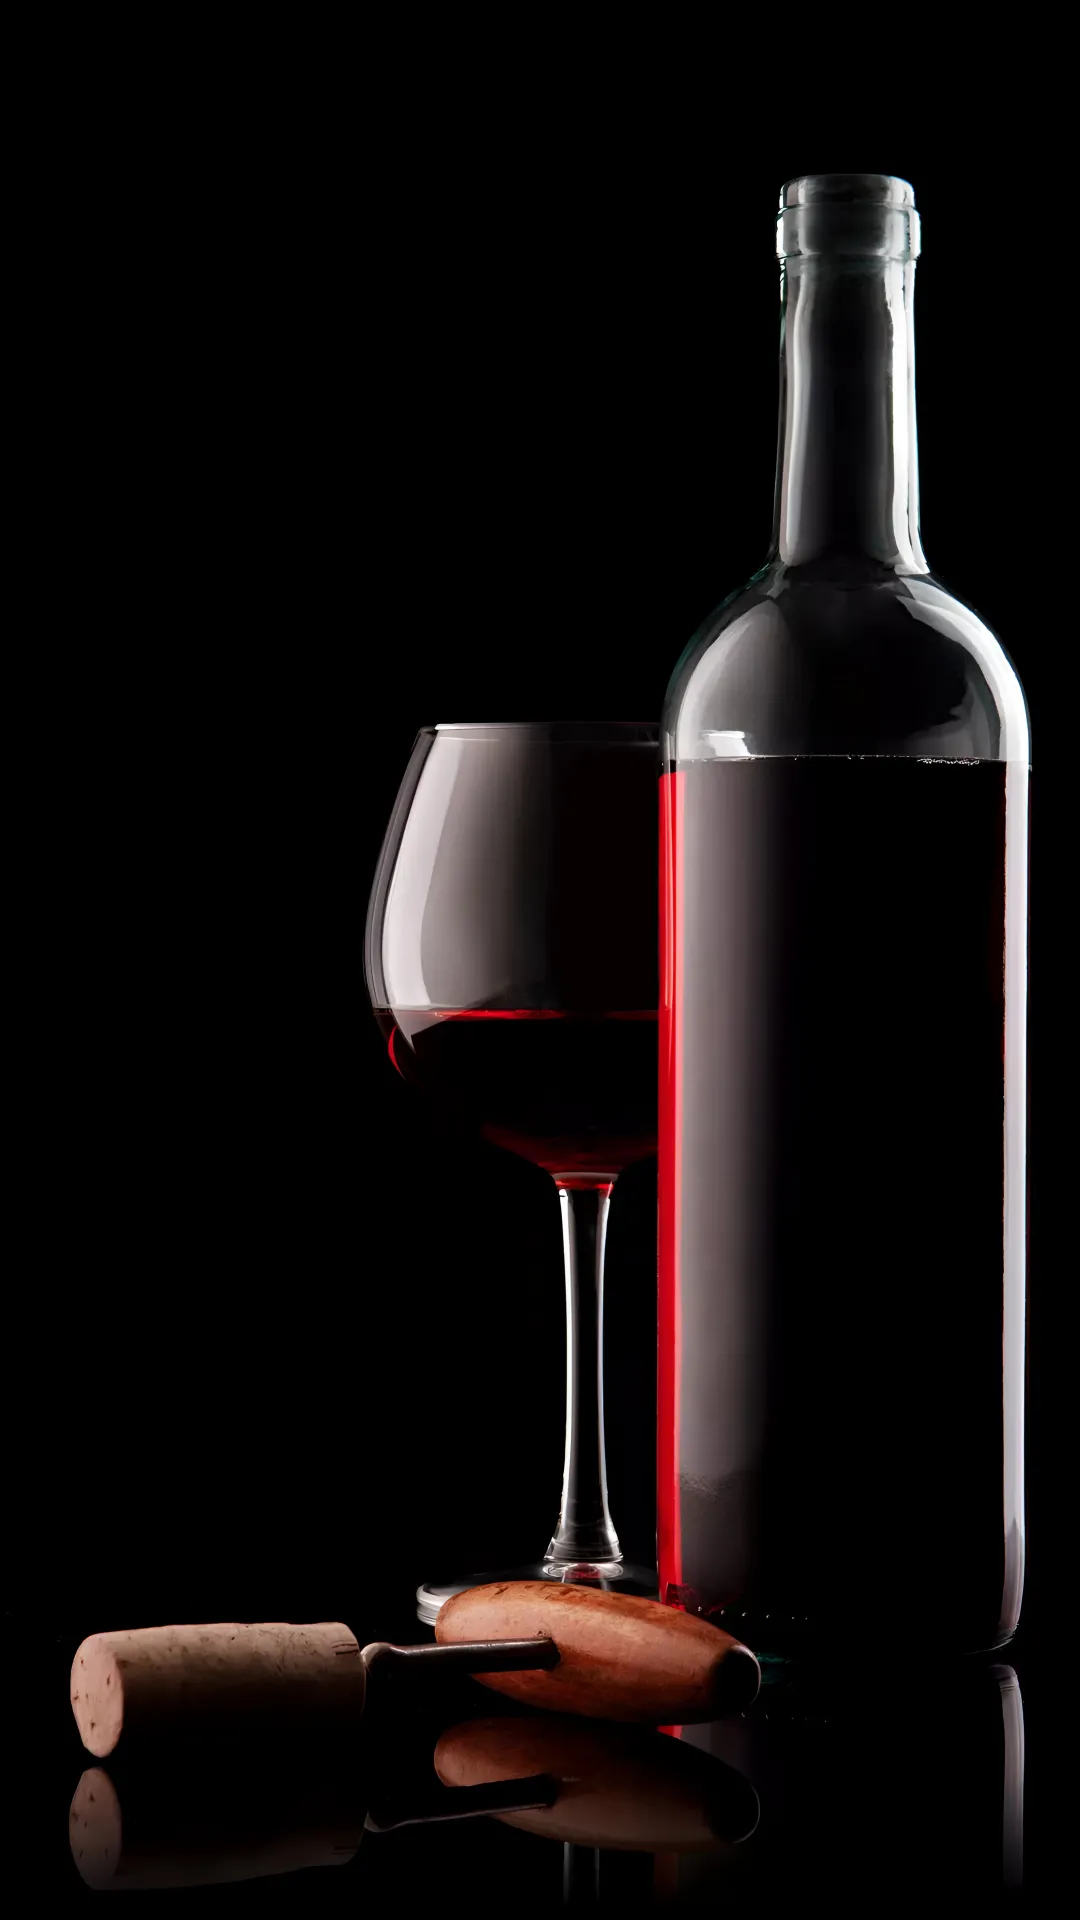 thumb for Red Wine Bottle And Glass Wallpaper